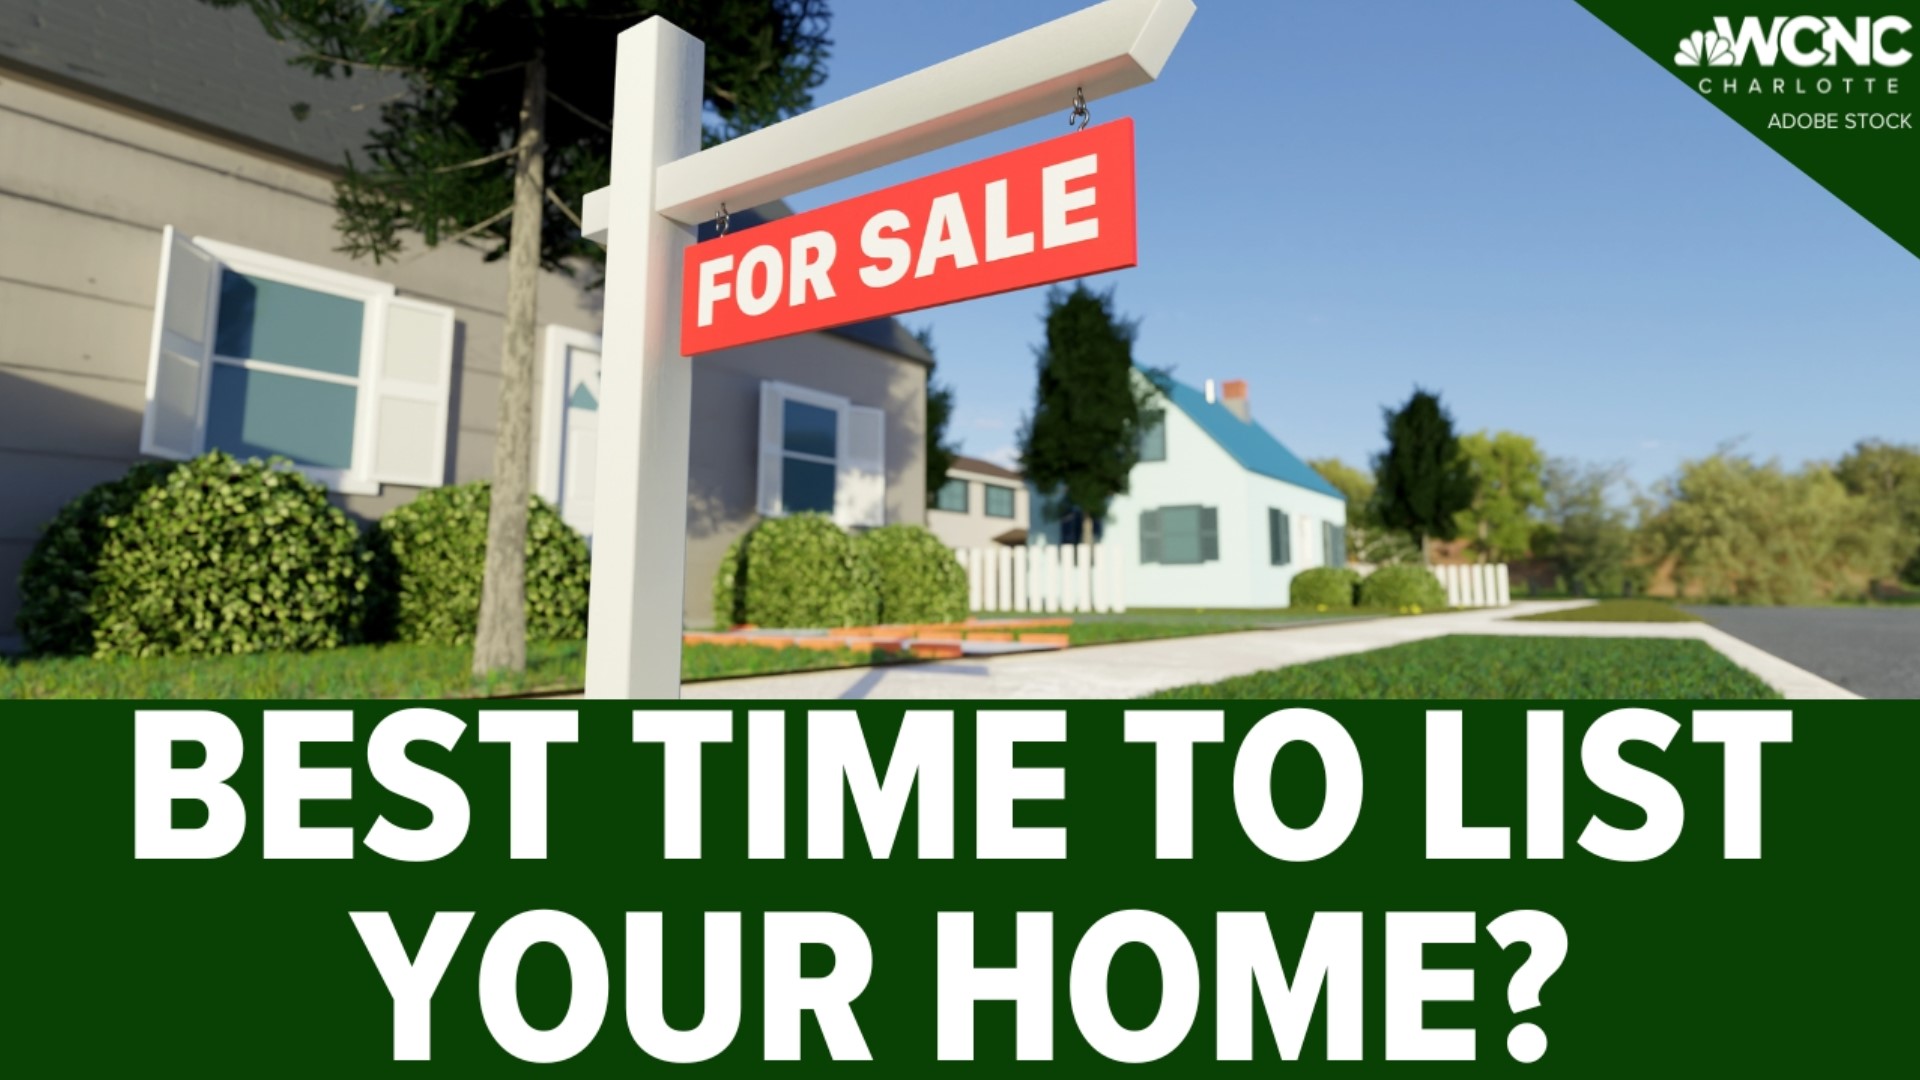 If you've been thinking about selling your home, now might be the perfect time to do it.